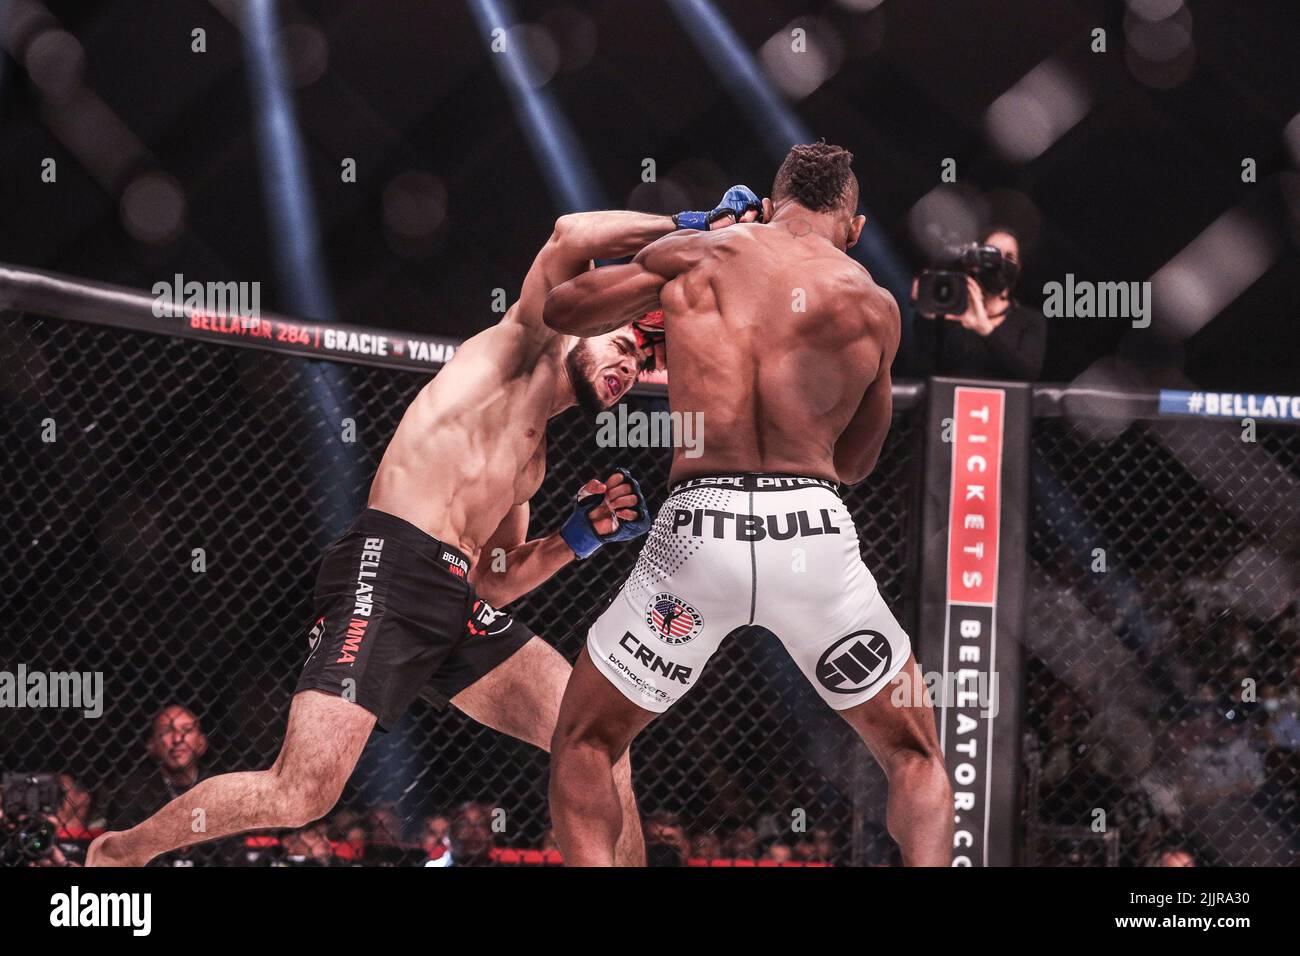 Tofiq Musayev lands a big overhand right to the ear of Sidney Outlaw at Bellator 283. Tofiq Musayev wins by way of Knock Out in the first round from t Stock Photo